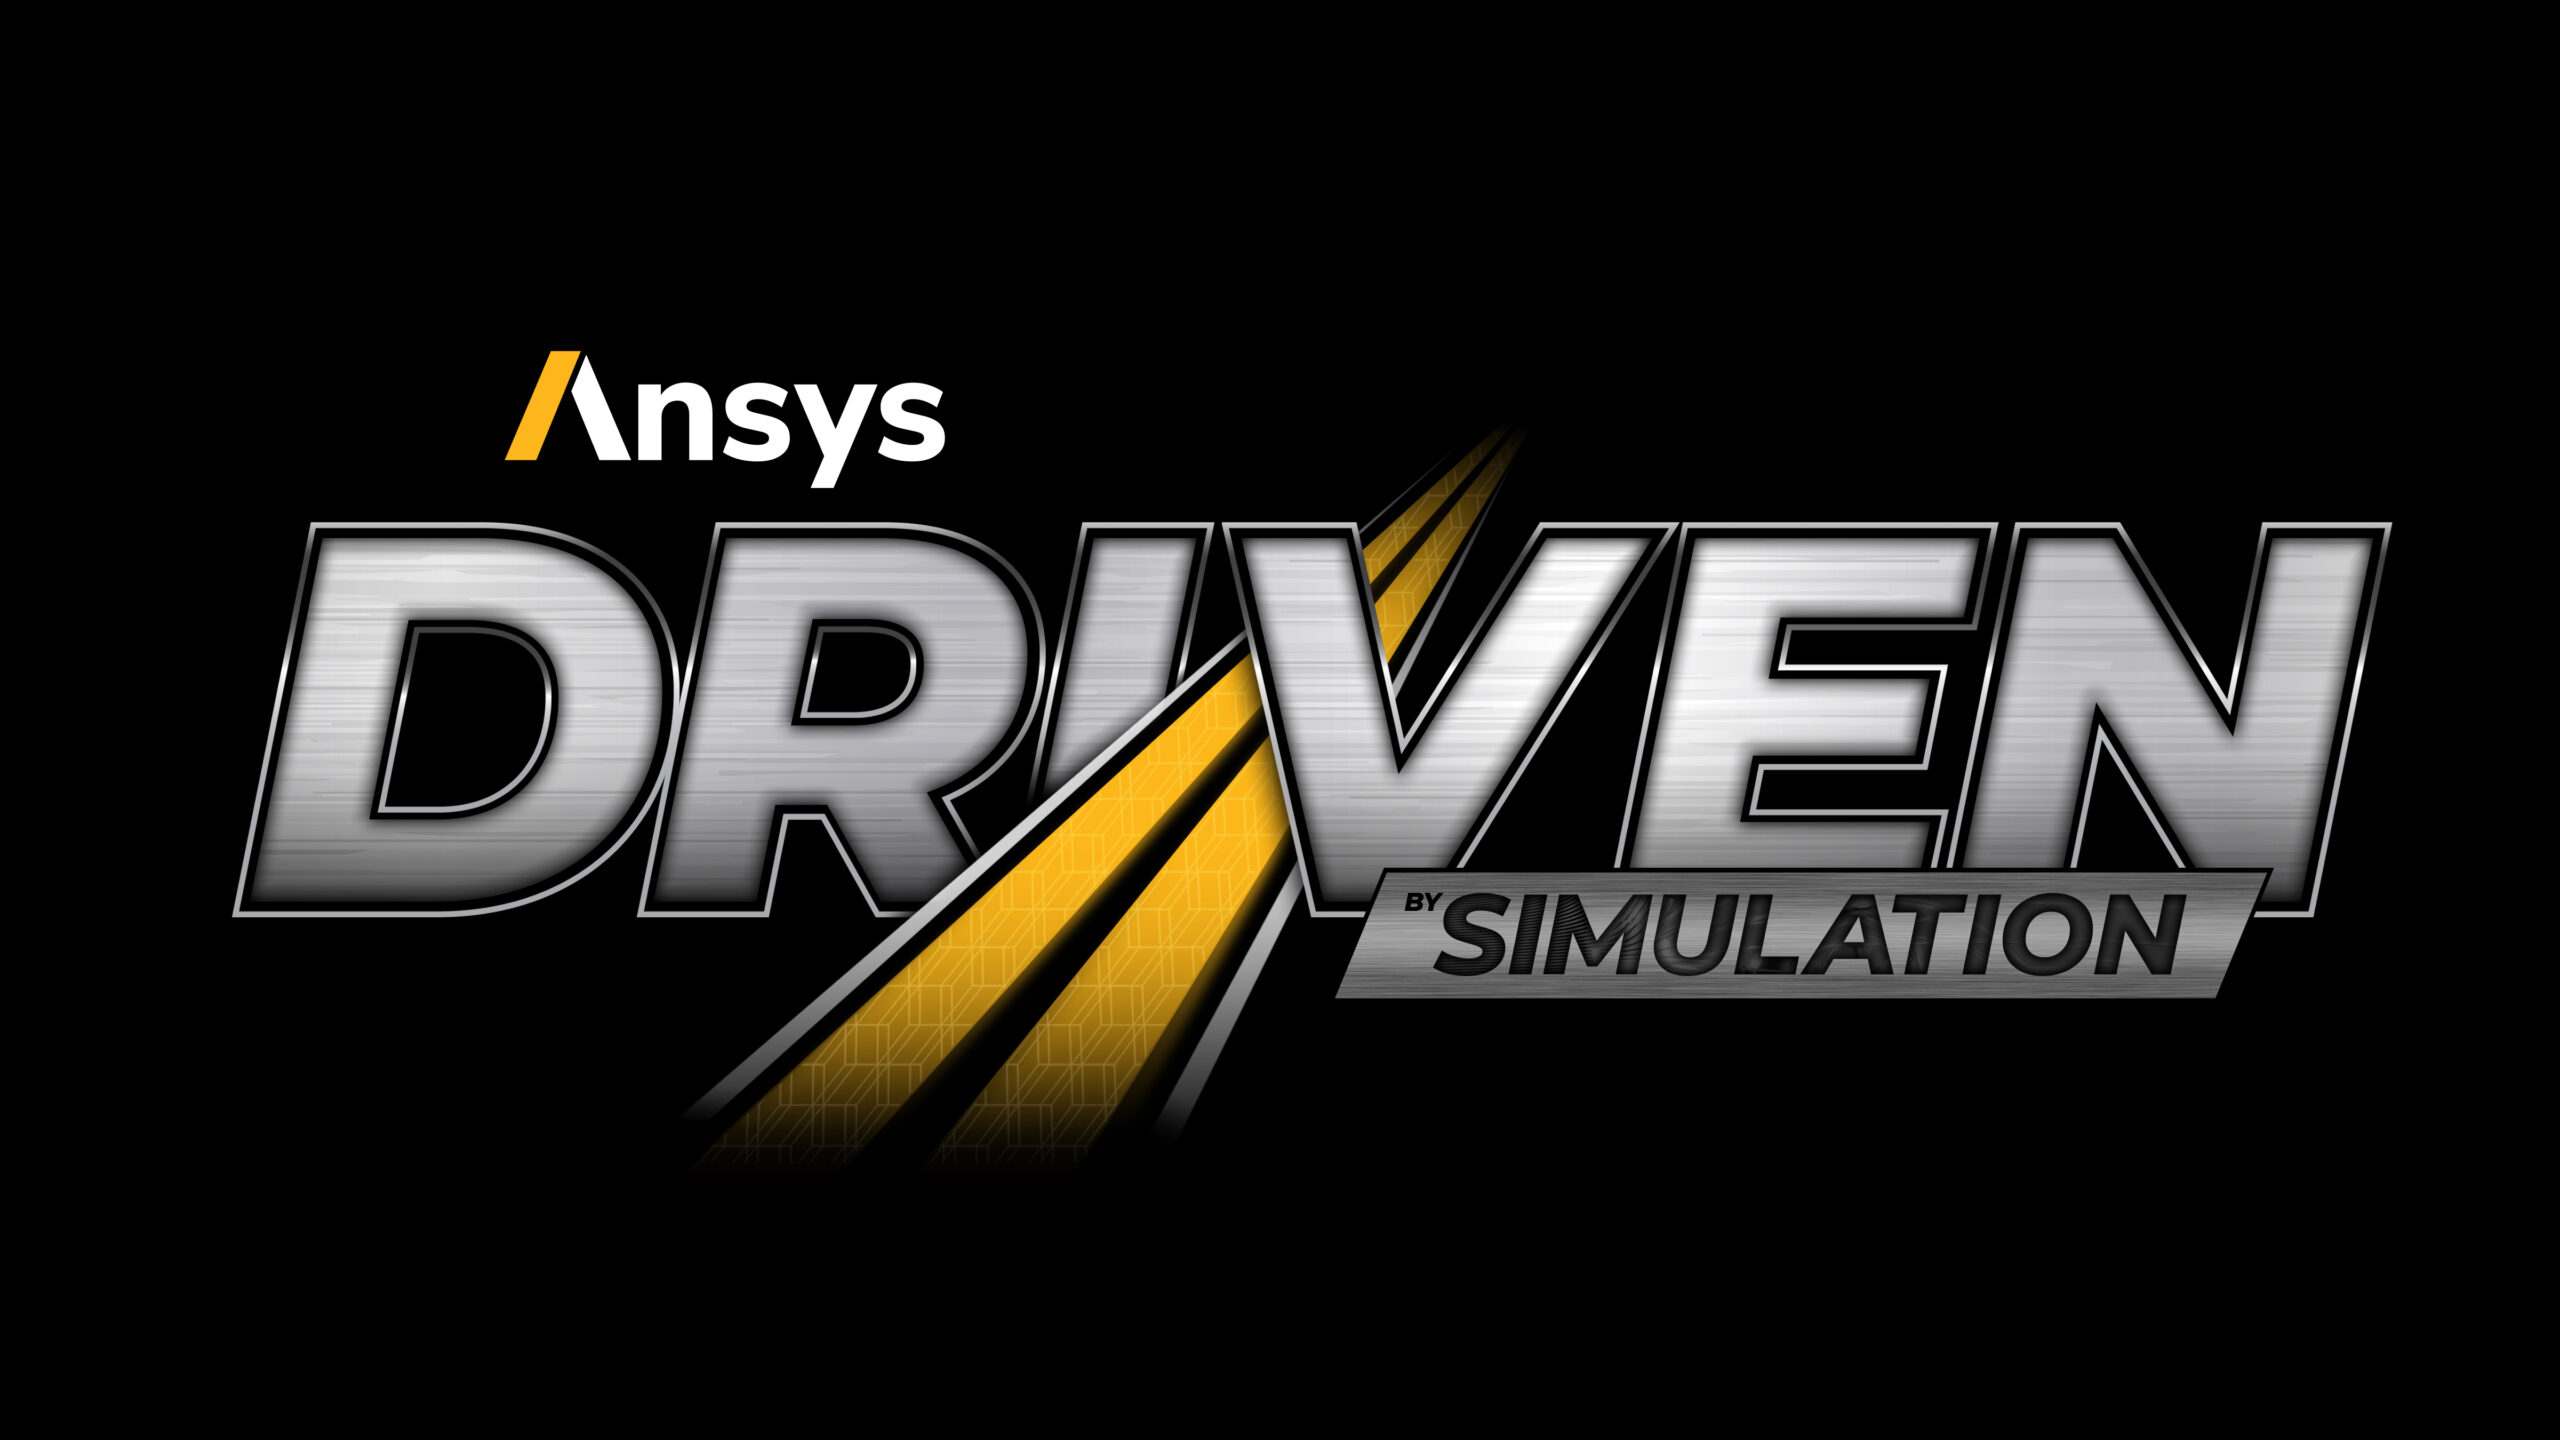 Ansys Driven by Simulation logo